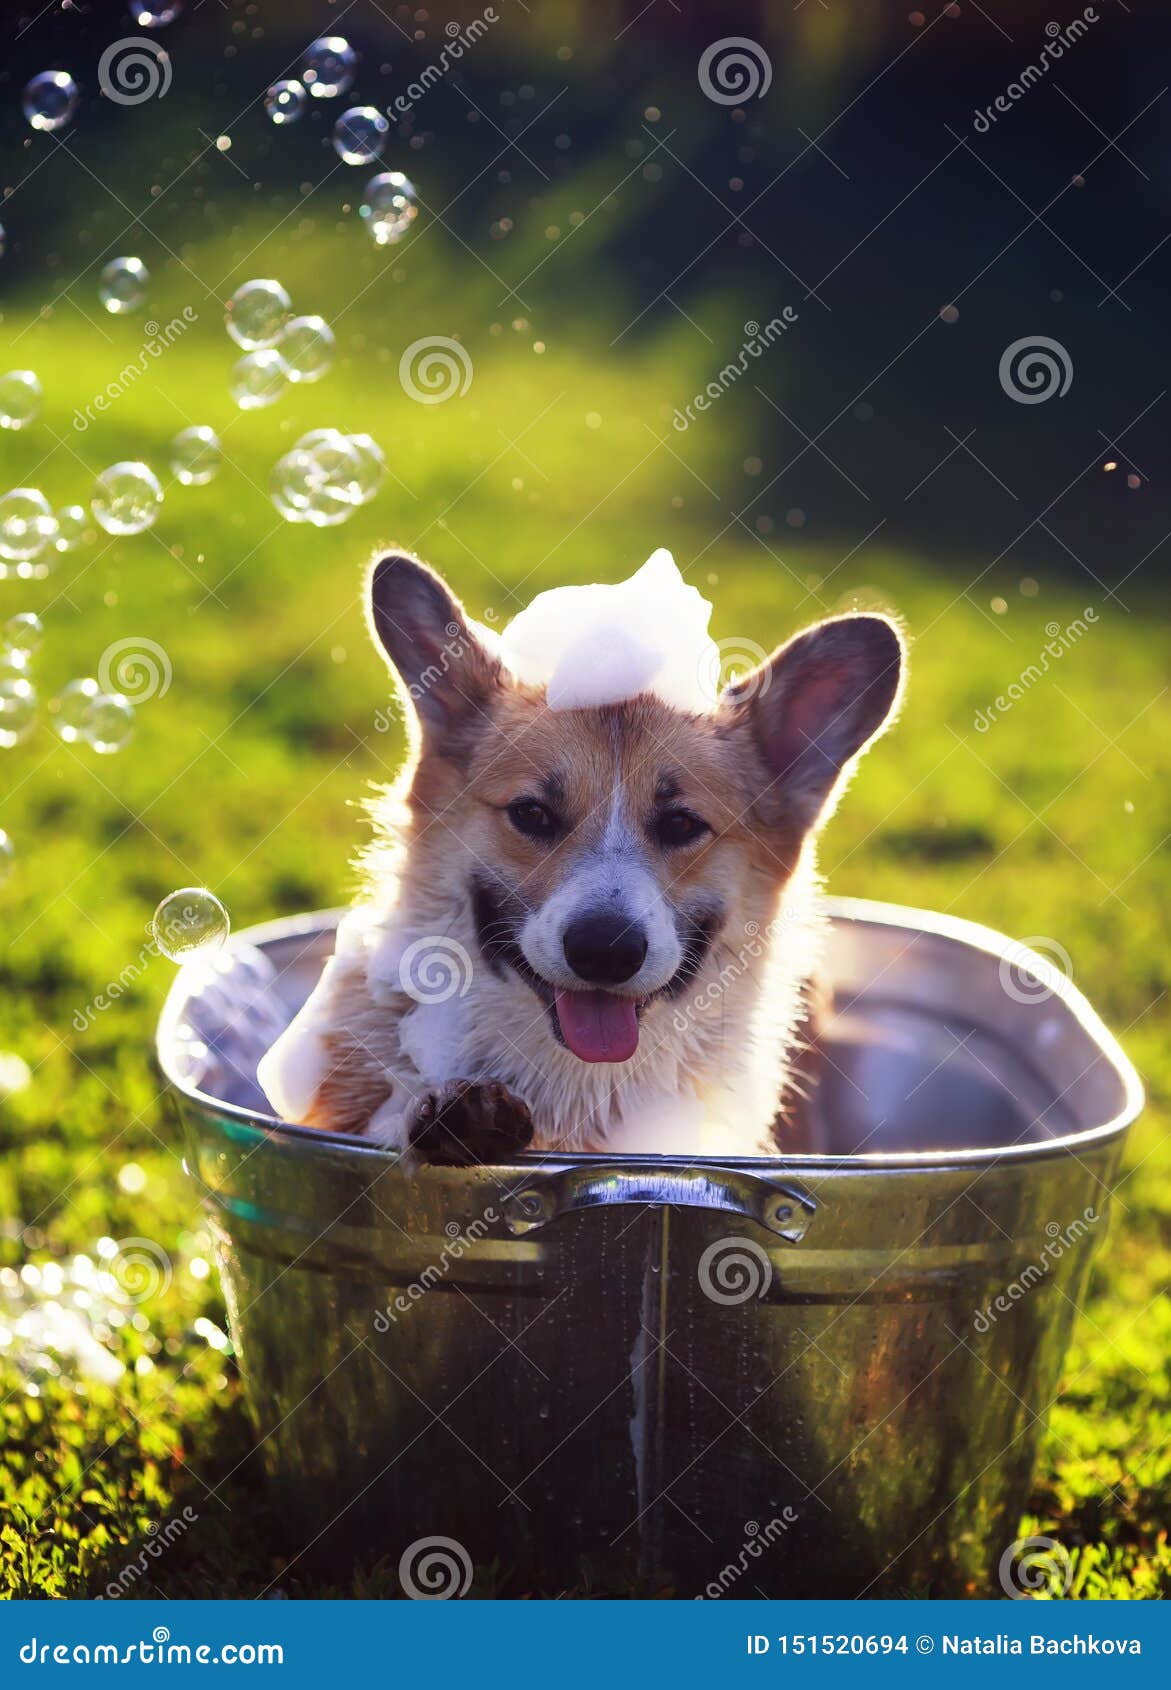 Cute Funny Puppy Dog Standing in a Metal T, is Cooled, Washed on the ...